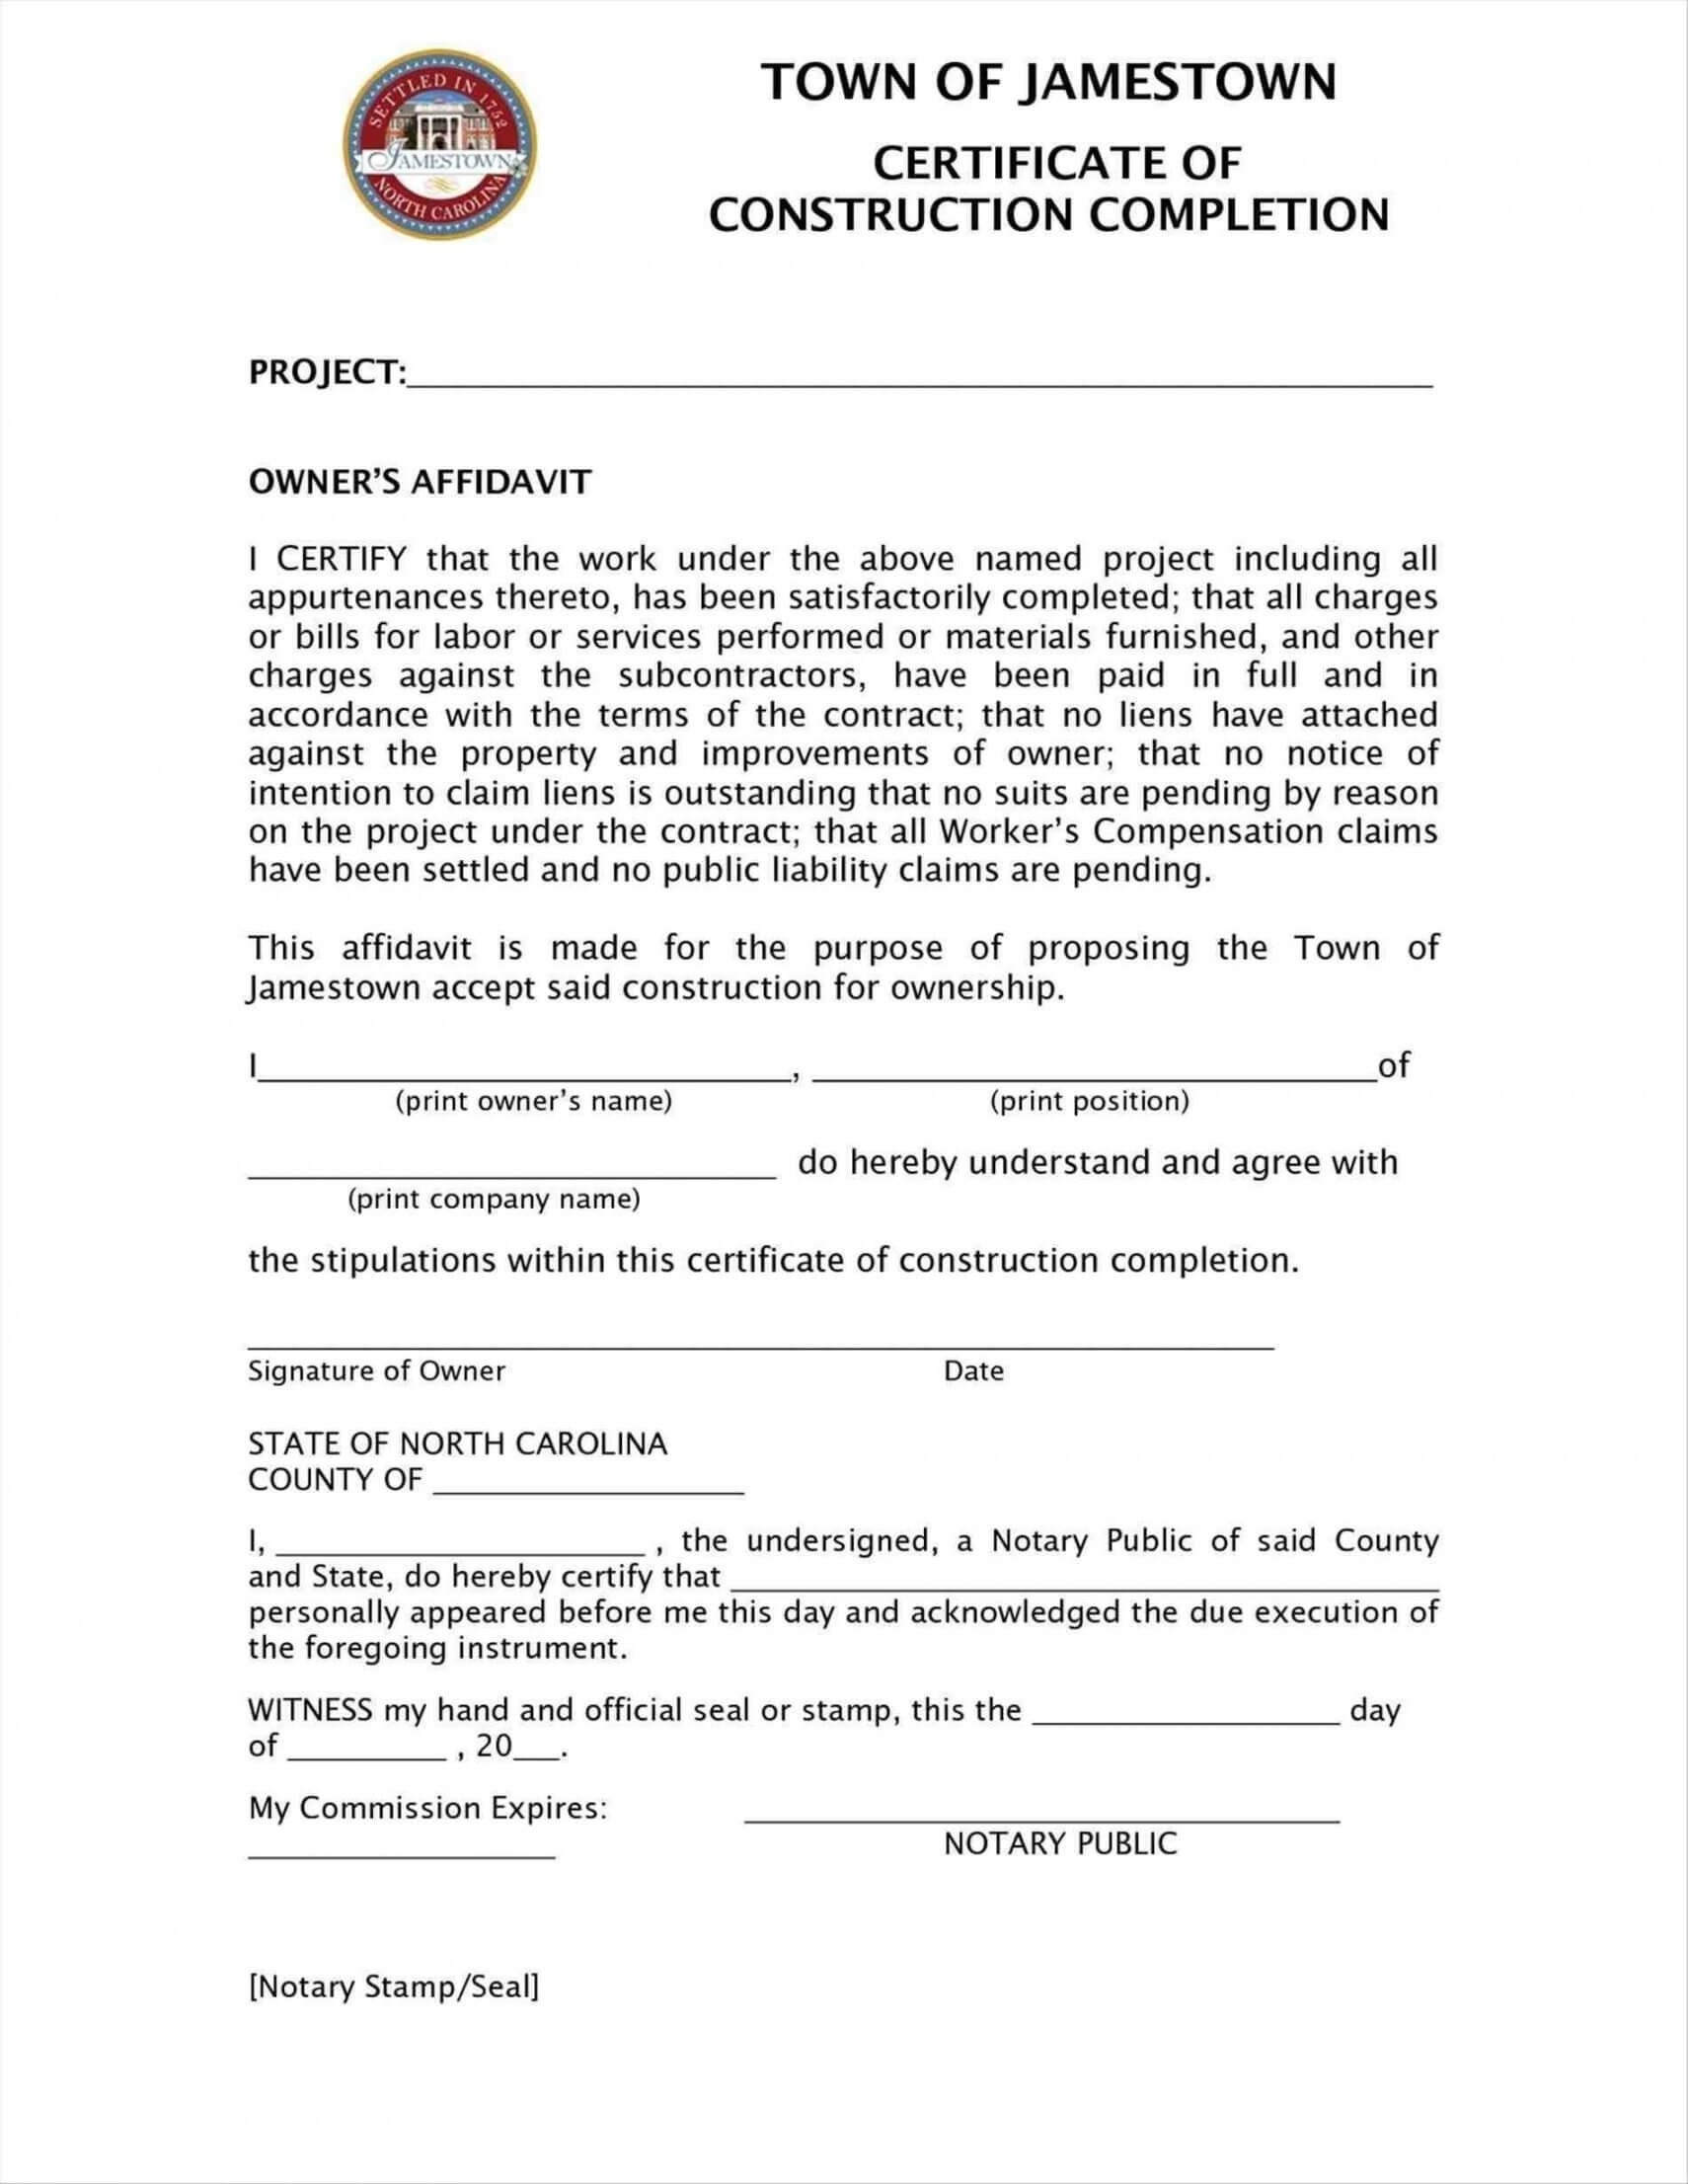 Free Completion Certificate Template Radiodignidad Pertaining To Certificate Of Completion Template Construction